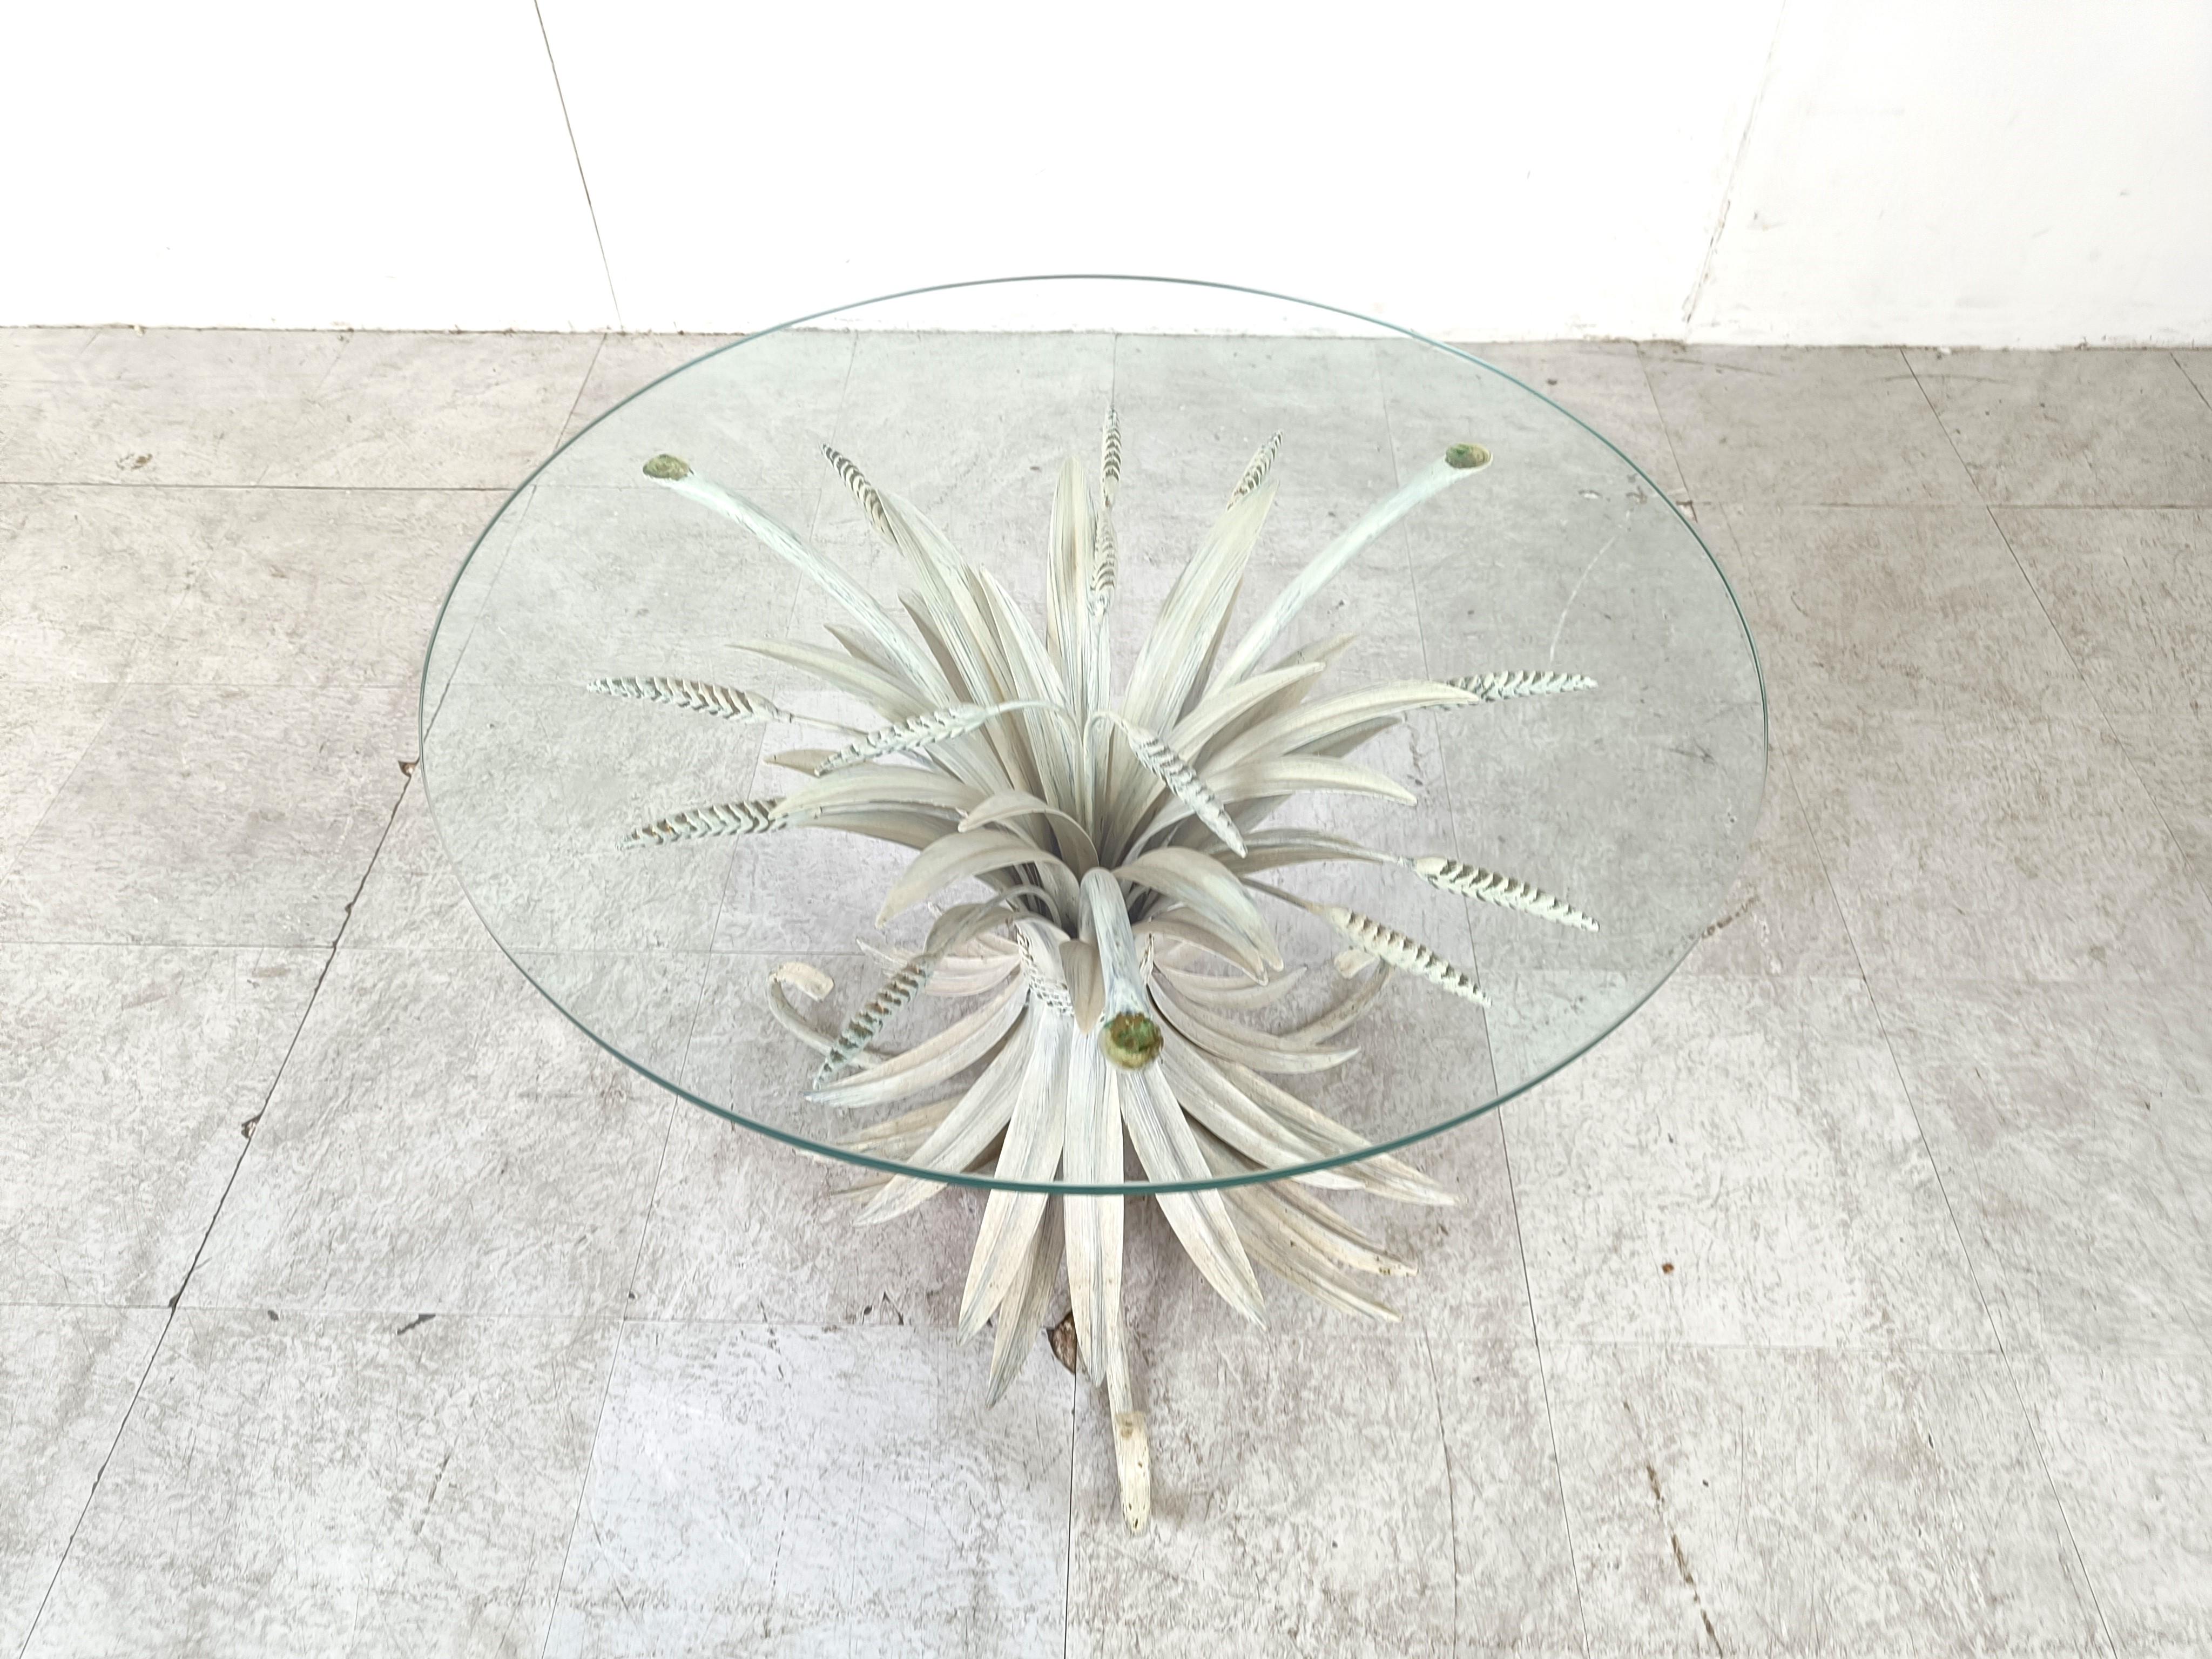 Vintage tripod Coco Chanel coffee table.

The table is named after the famous fashion queen Gabrielle Bonheur Chanel.

Made of white metal with a round glass top.

The table is in very good vintage condition.

1960's - Italy

Dimensions:

Height: